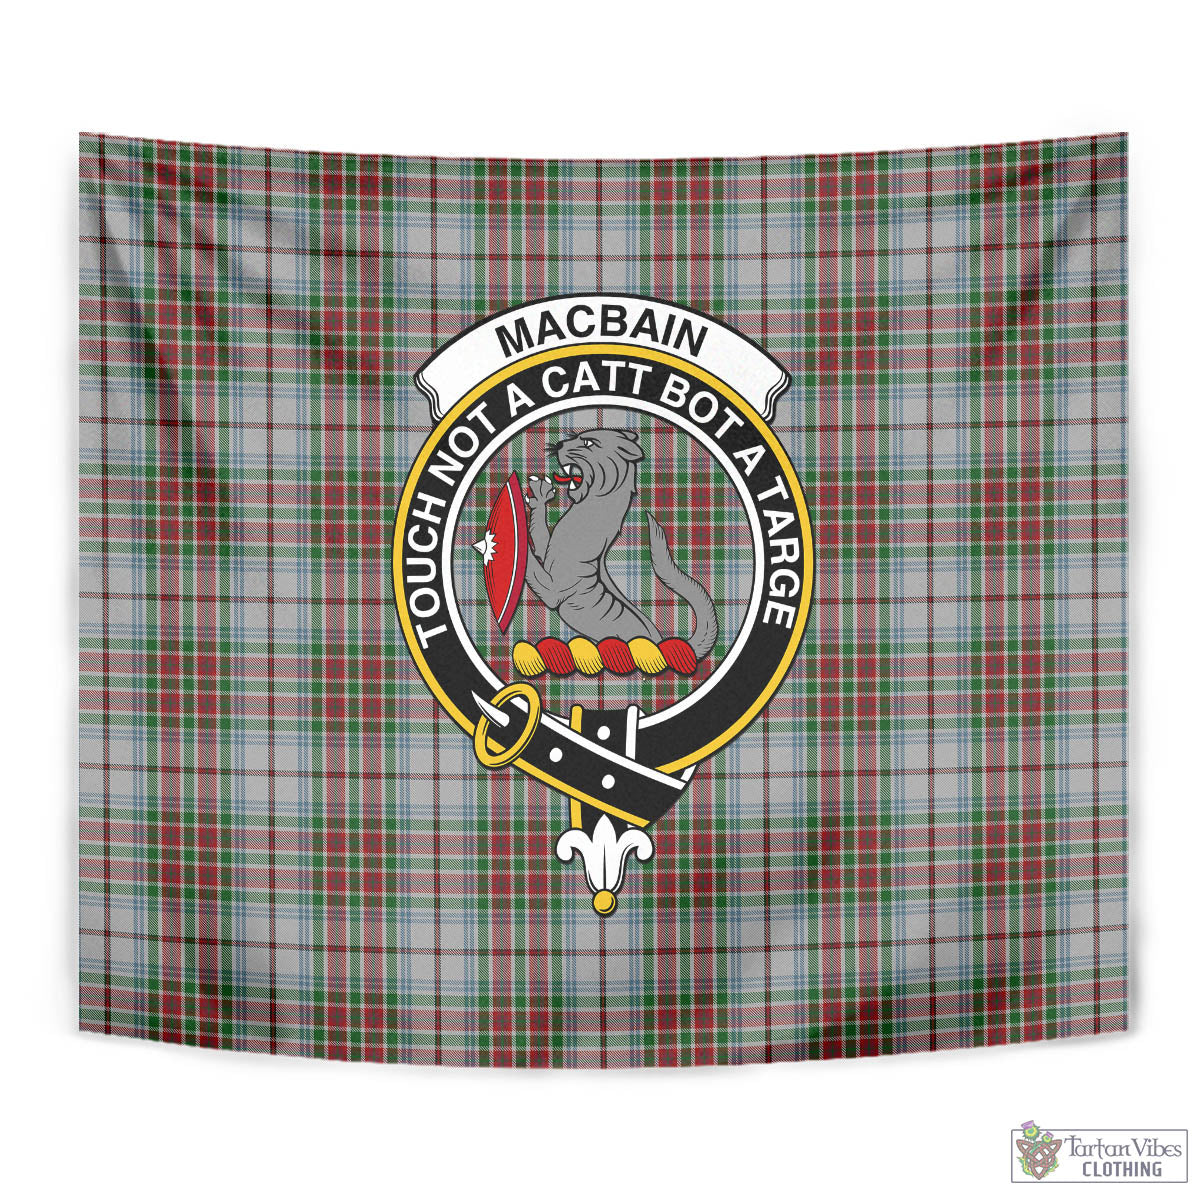 Tartan Vibes Clothing MacBain Dress Tartan Tapestry Wall Hanging and Home Decor for Room with Family Crest